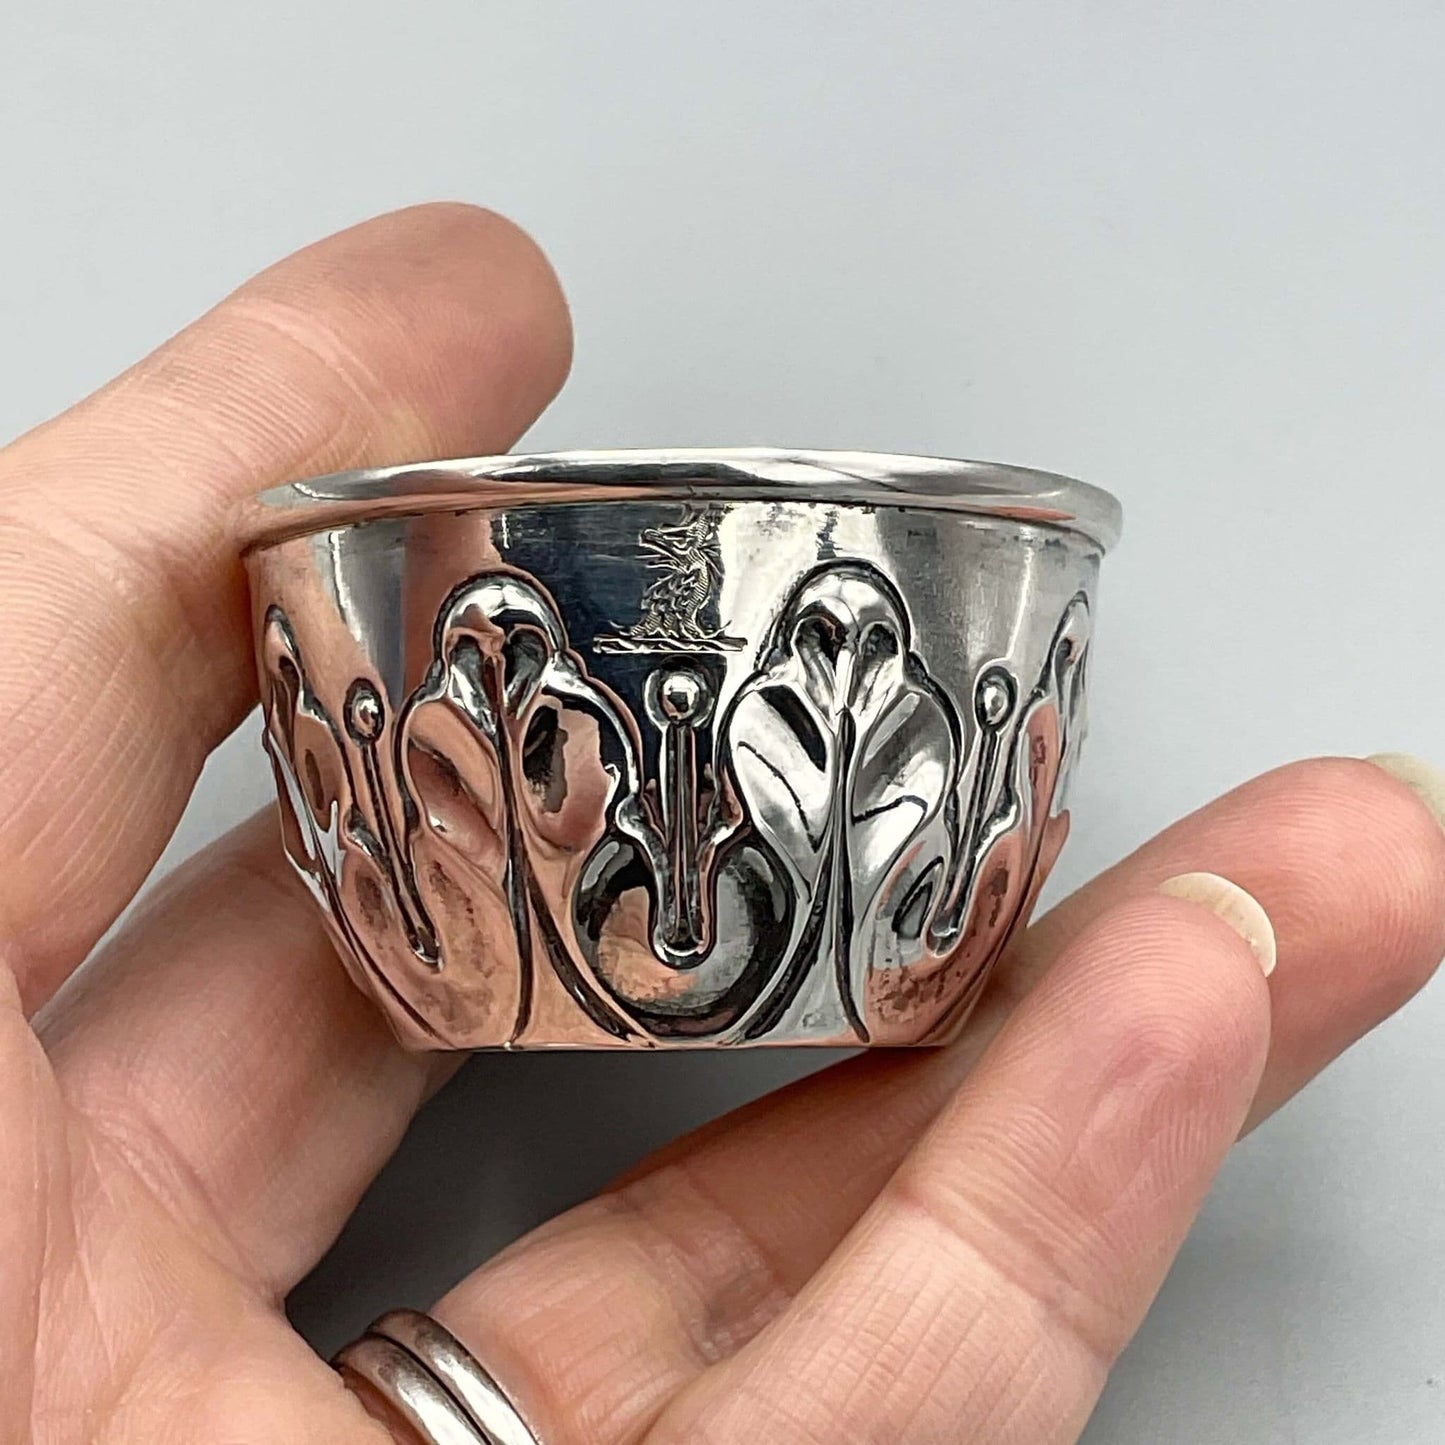 Antique Silver Salt pot with wavy design on outside with dragon motif held in fingers